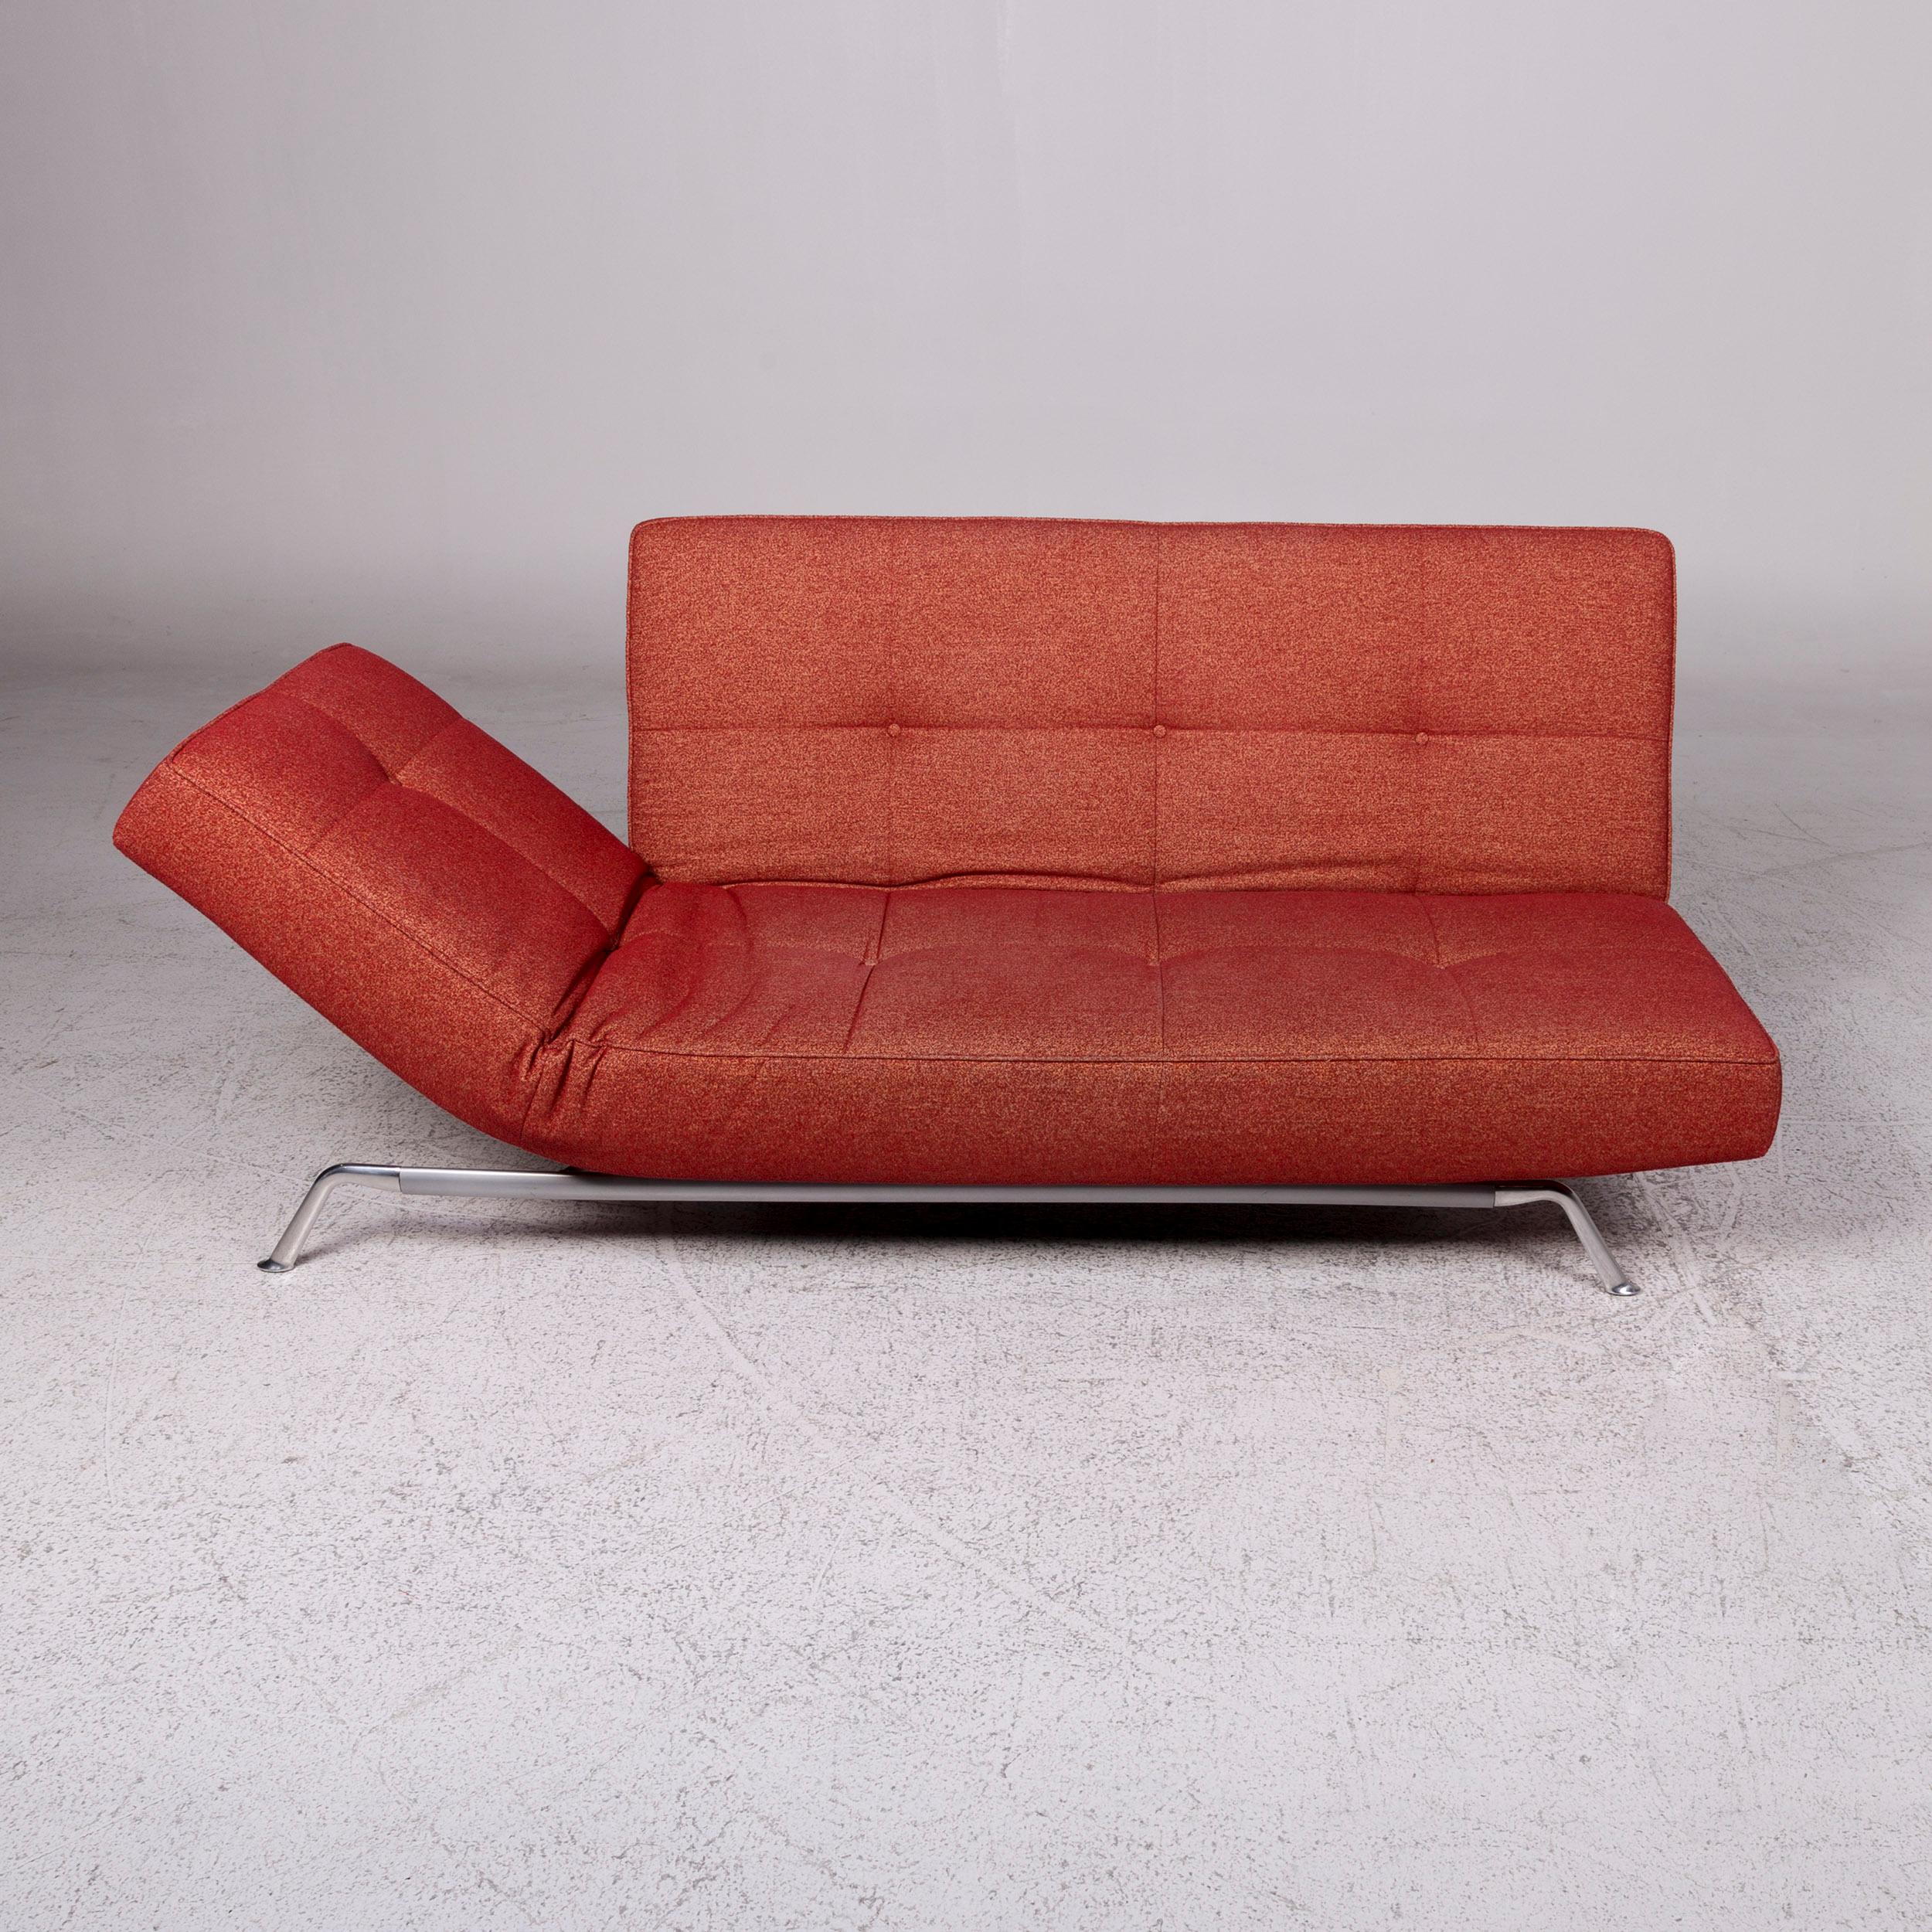 Ligne Roset Smala Fabric Sofa Red Three-Seat Sofa Bed Function Couch 2